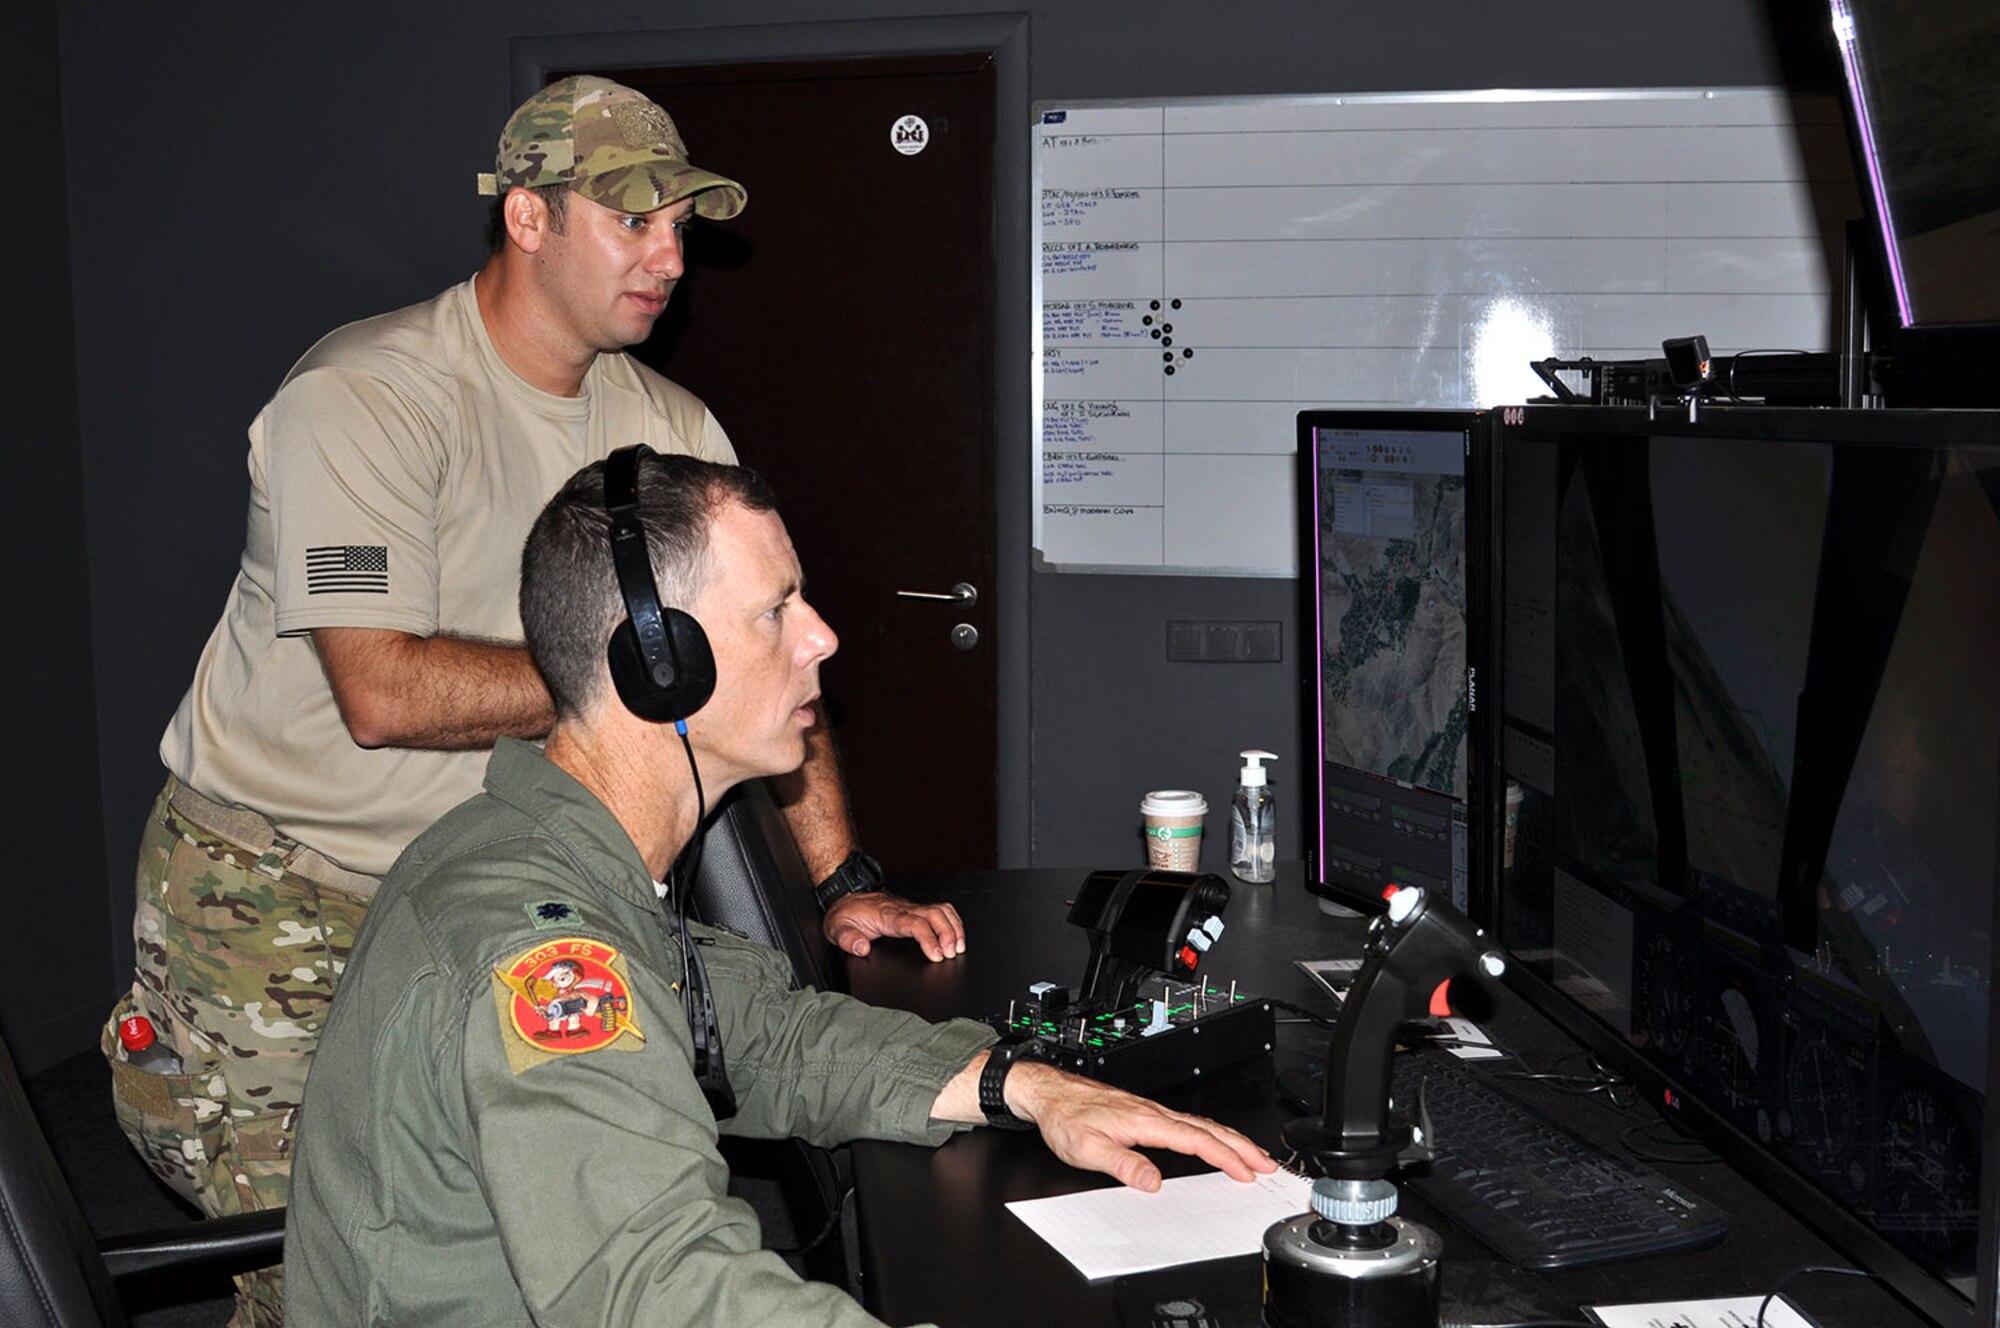 Lt. Col. John Marks, 303rd Fighter Squadron, Whiteman AFB, Missouri, trains with Air National Guard Joint Terminal Attack Controllers and Latvian military members in a simulator near Adazi Range in Latvia during a recent exercise. Marks received the Reserve Aircrew Award, the President’s Award. During 2014 Marks deployed in support of Operation Enduring Freedom. He led 124 combat missions, supporting 132 ground operations and 29 troops-in-contact situations without friendly or civilian casualty. By his tactical expertise and instruction, the squadron achieved a 99.7 percent weapons effectiveness rate.   (U.S. Air Force photo/Capt. Denise Haeussler)